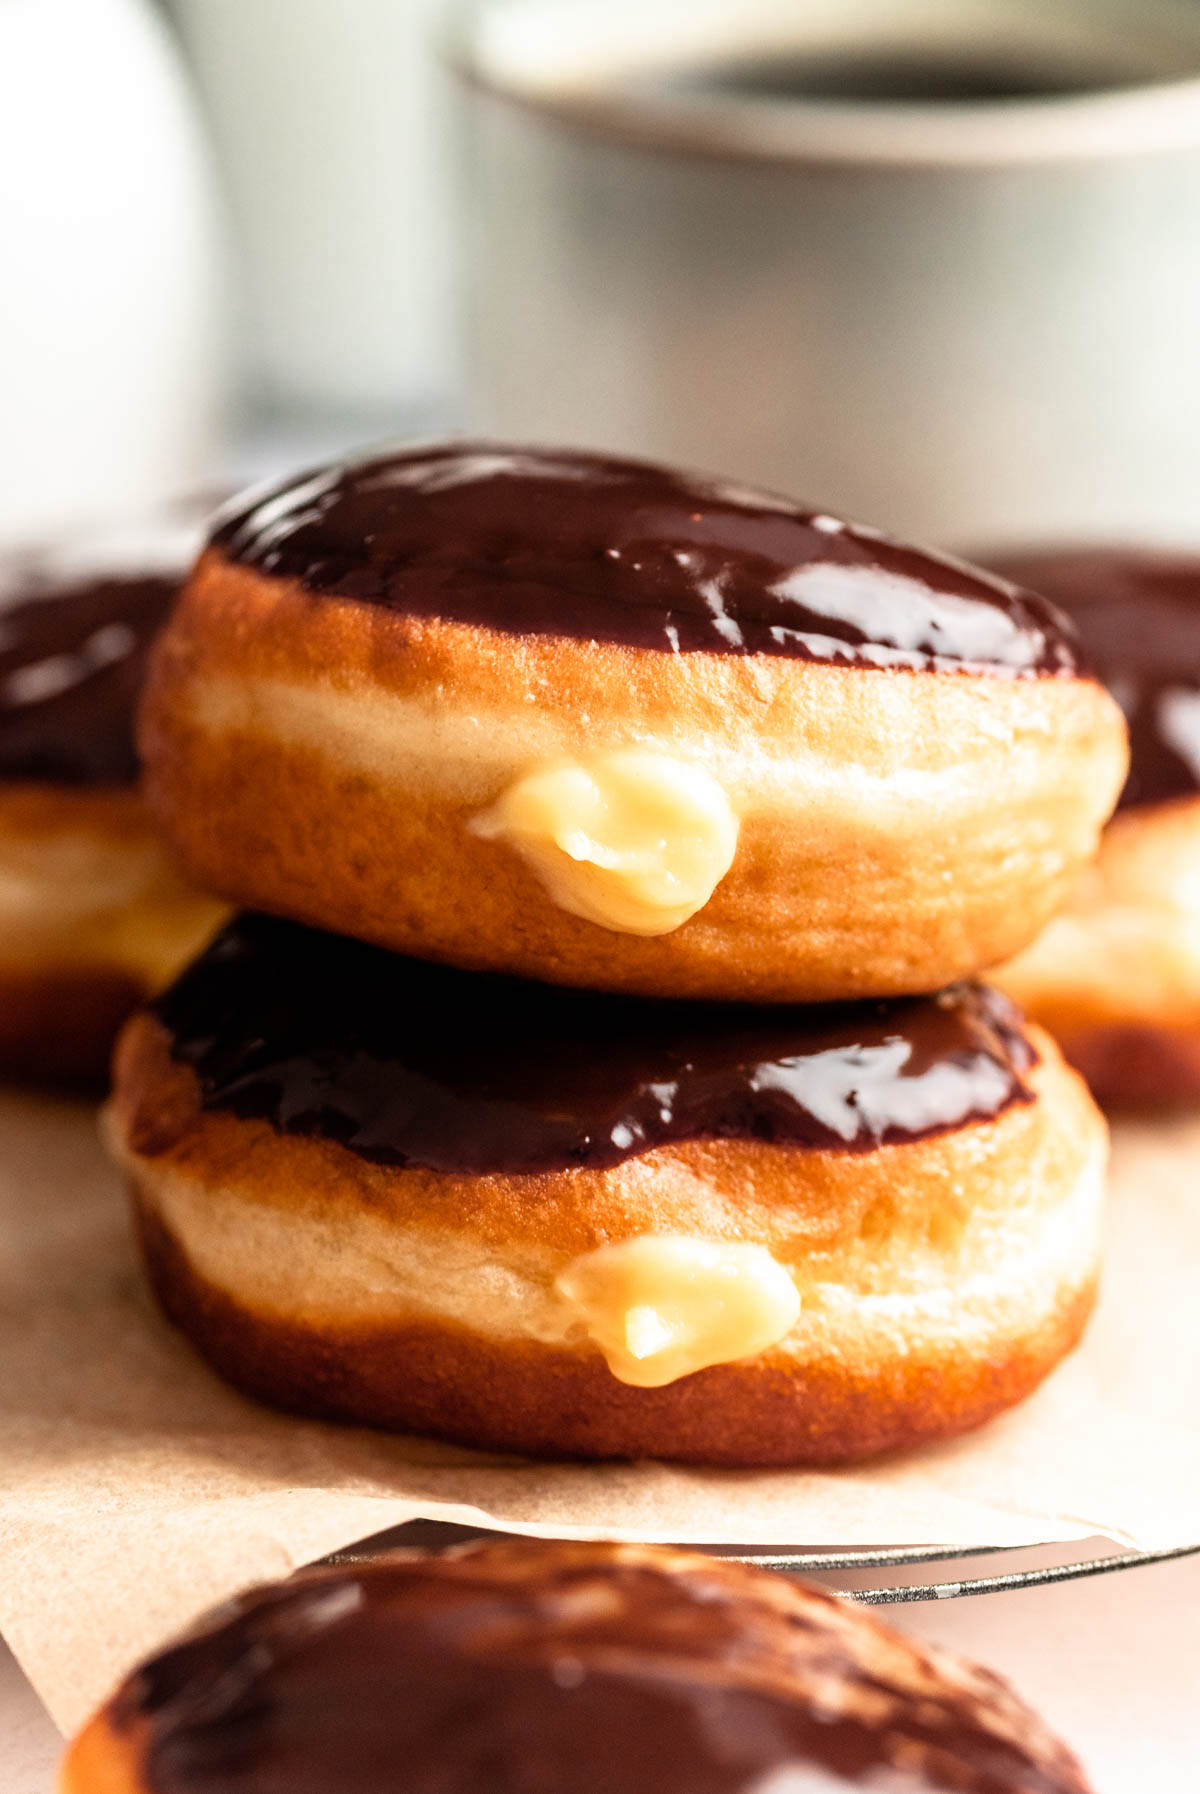 Stack of two Boston cream donuts.